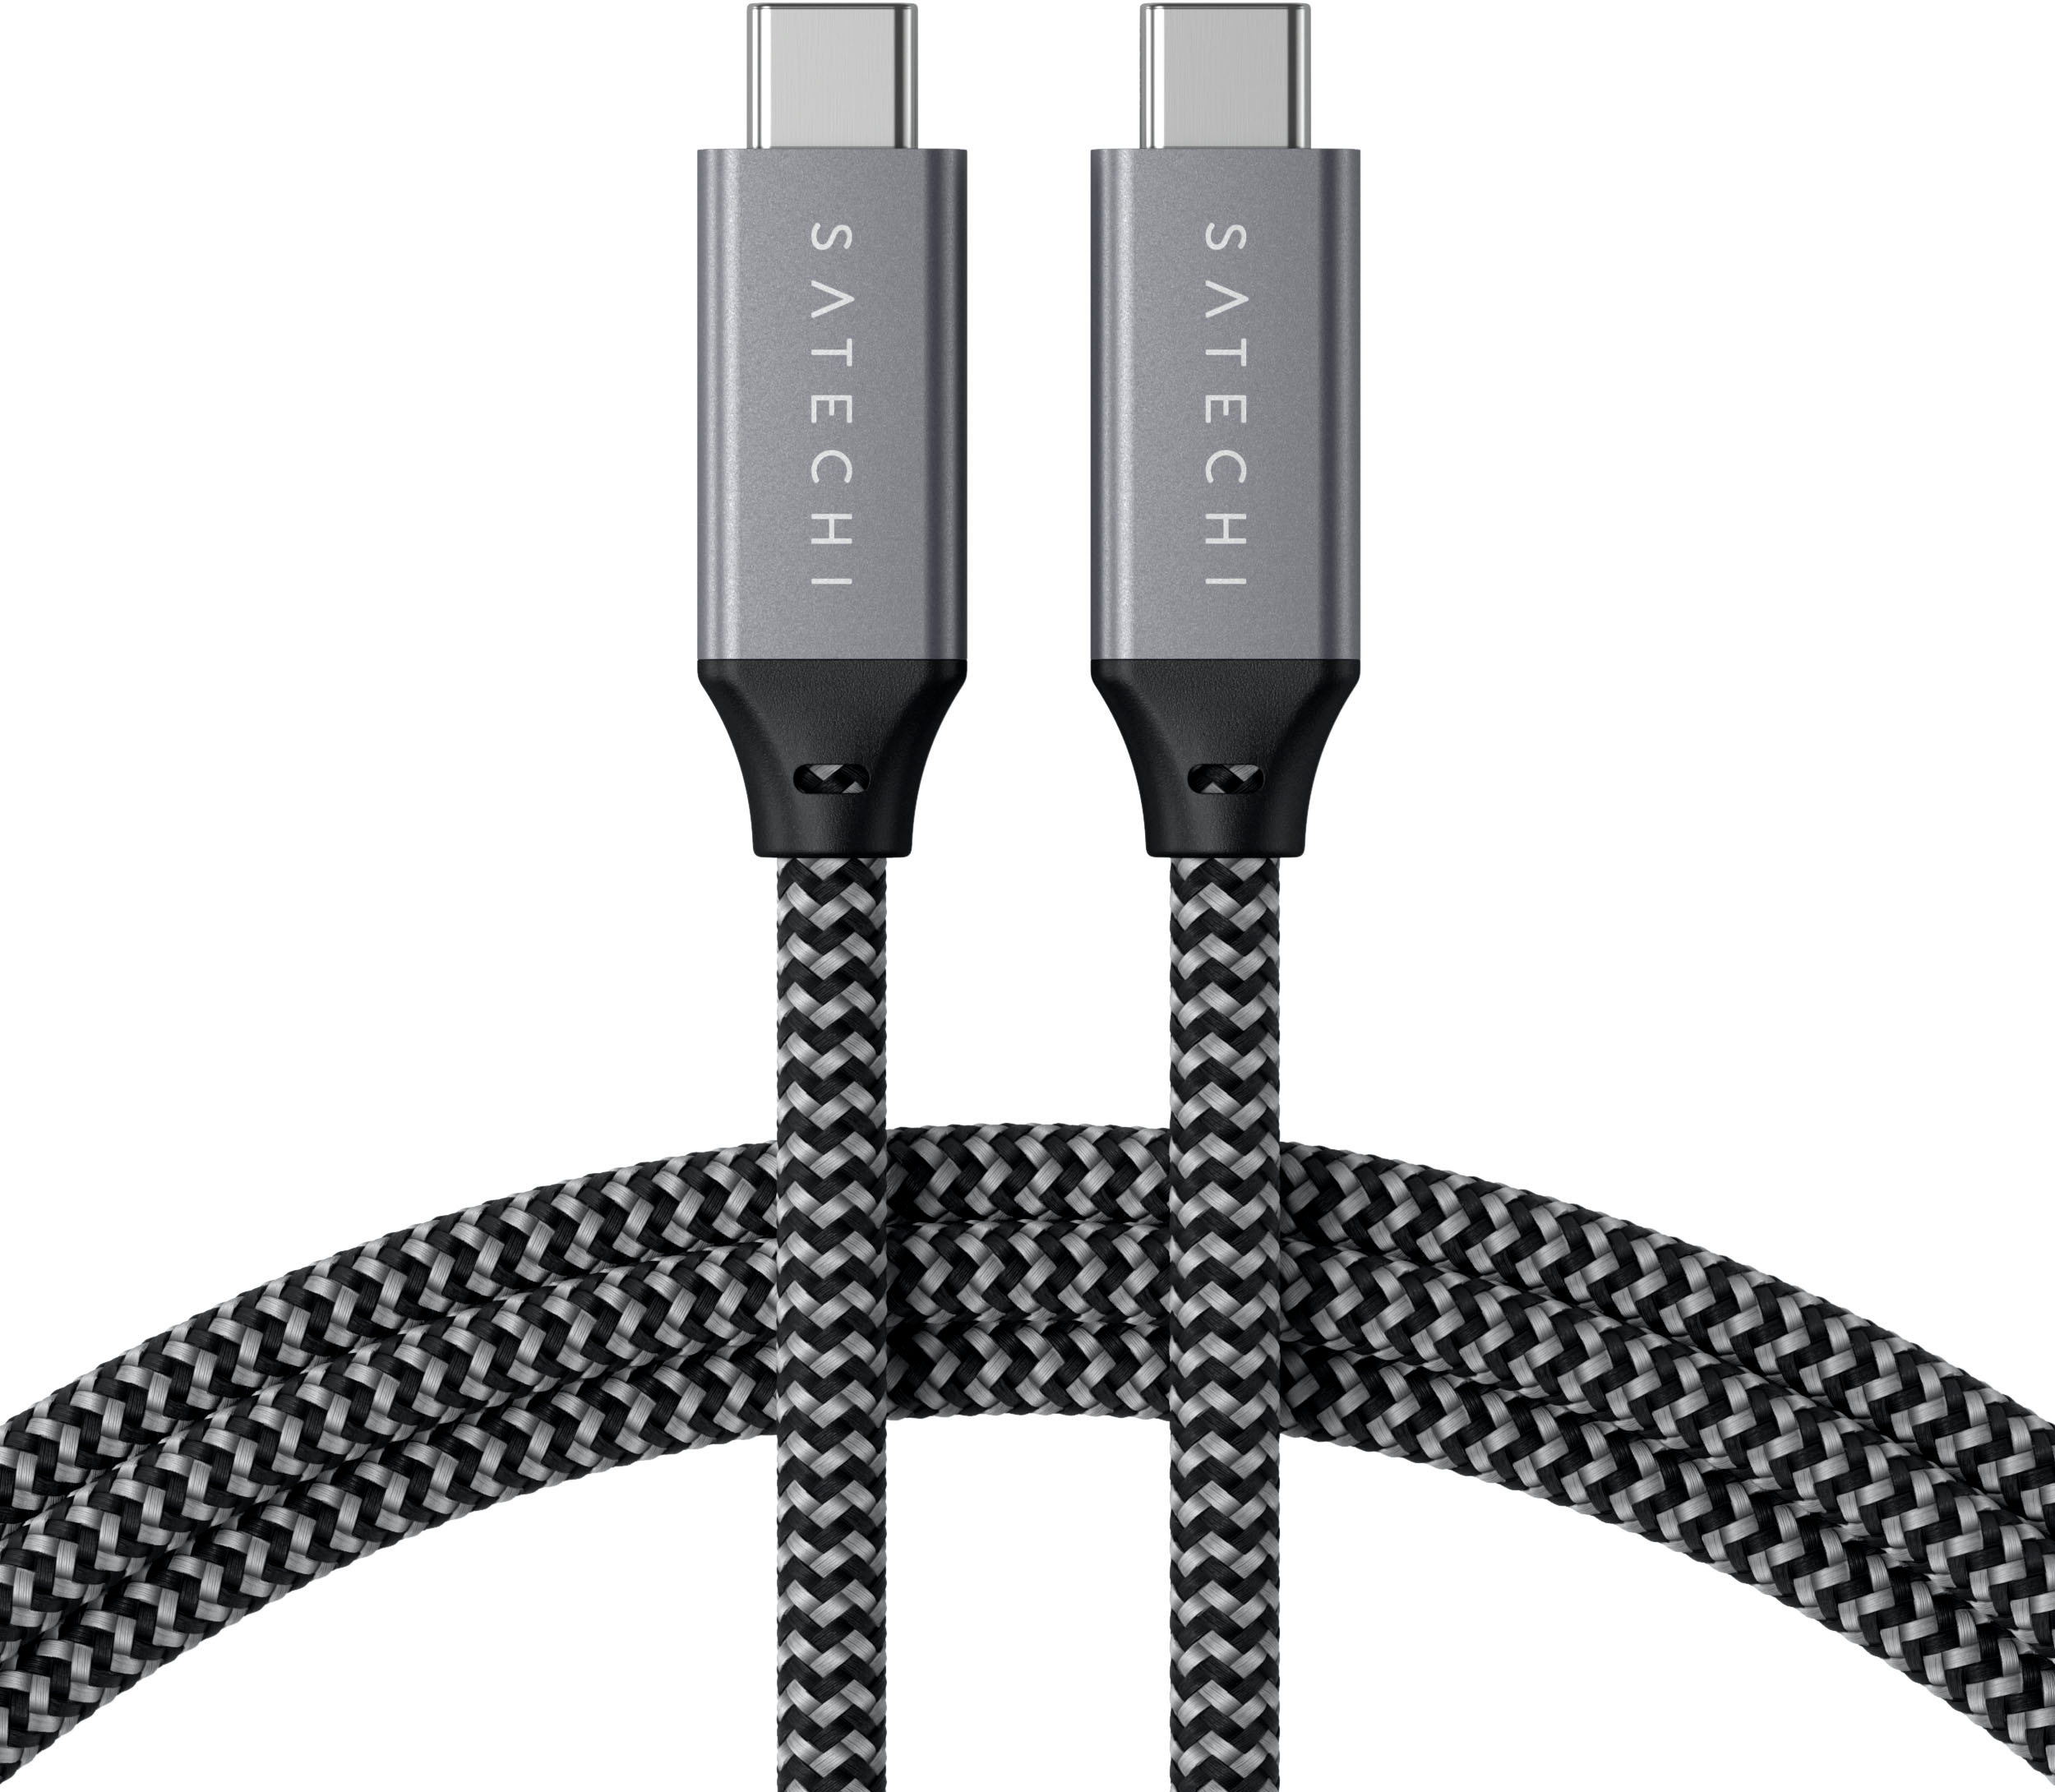 USB-C to Lightning Cable - 10 inches - Satechi